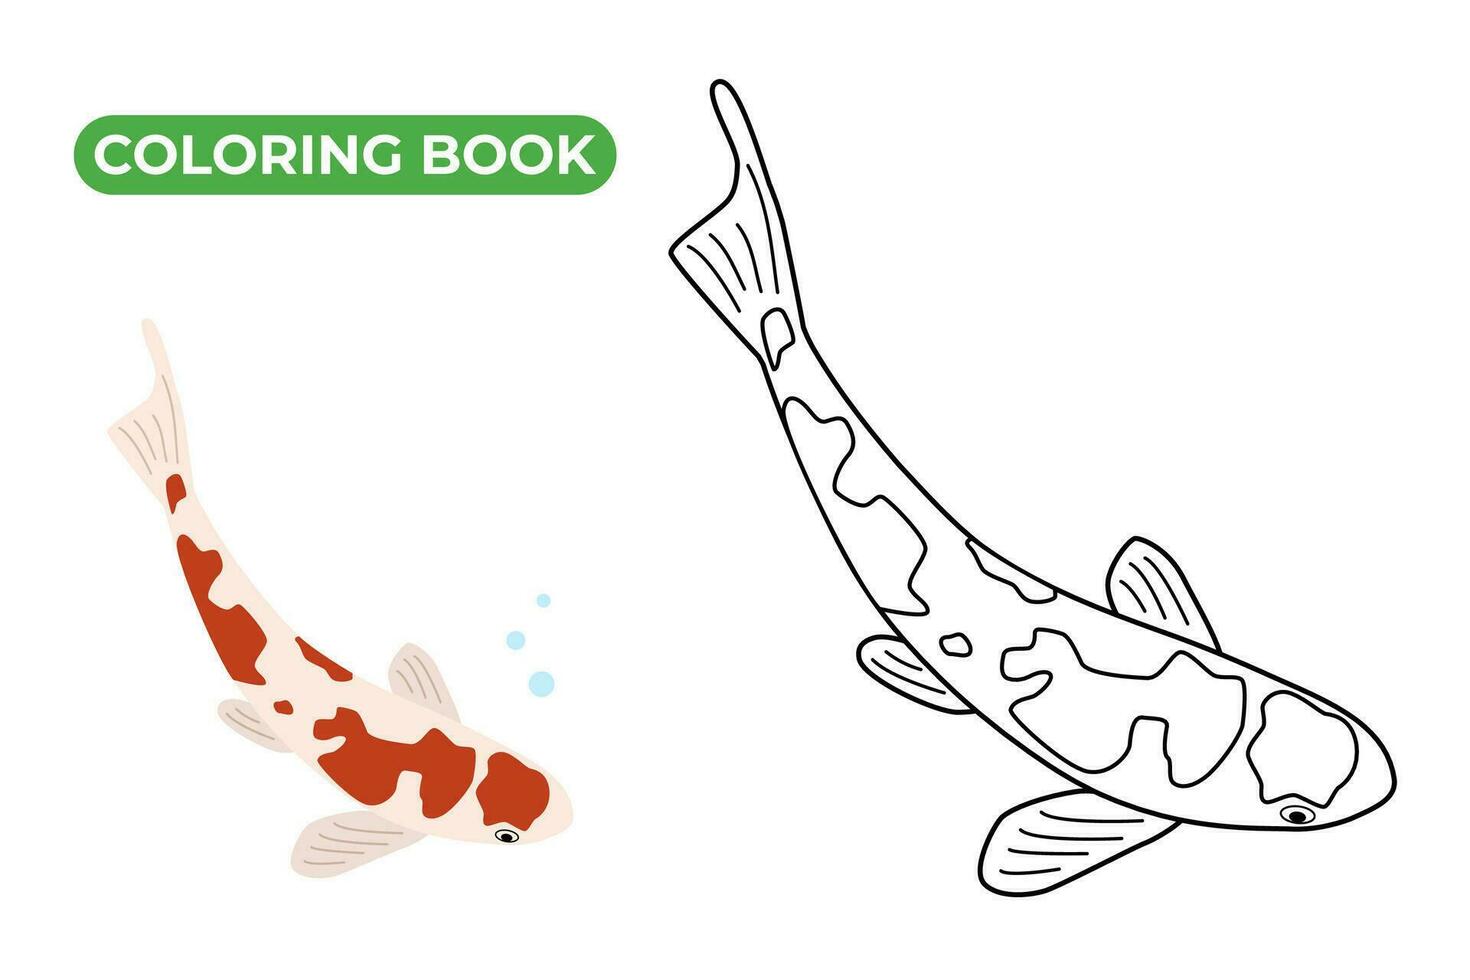 Koi carp coloring book. Linear vector illustration. Contour drawing of spotted japanese fish. Hand drawn sketch doodle style.